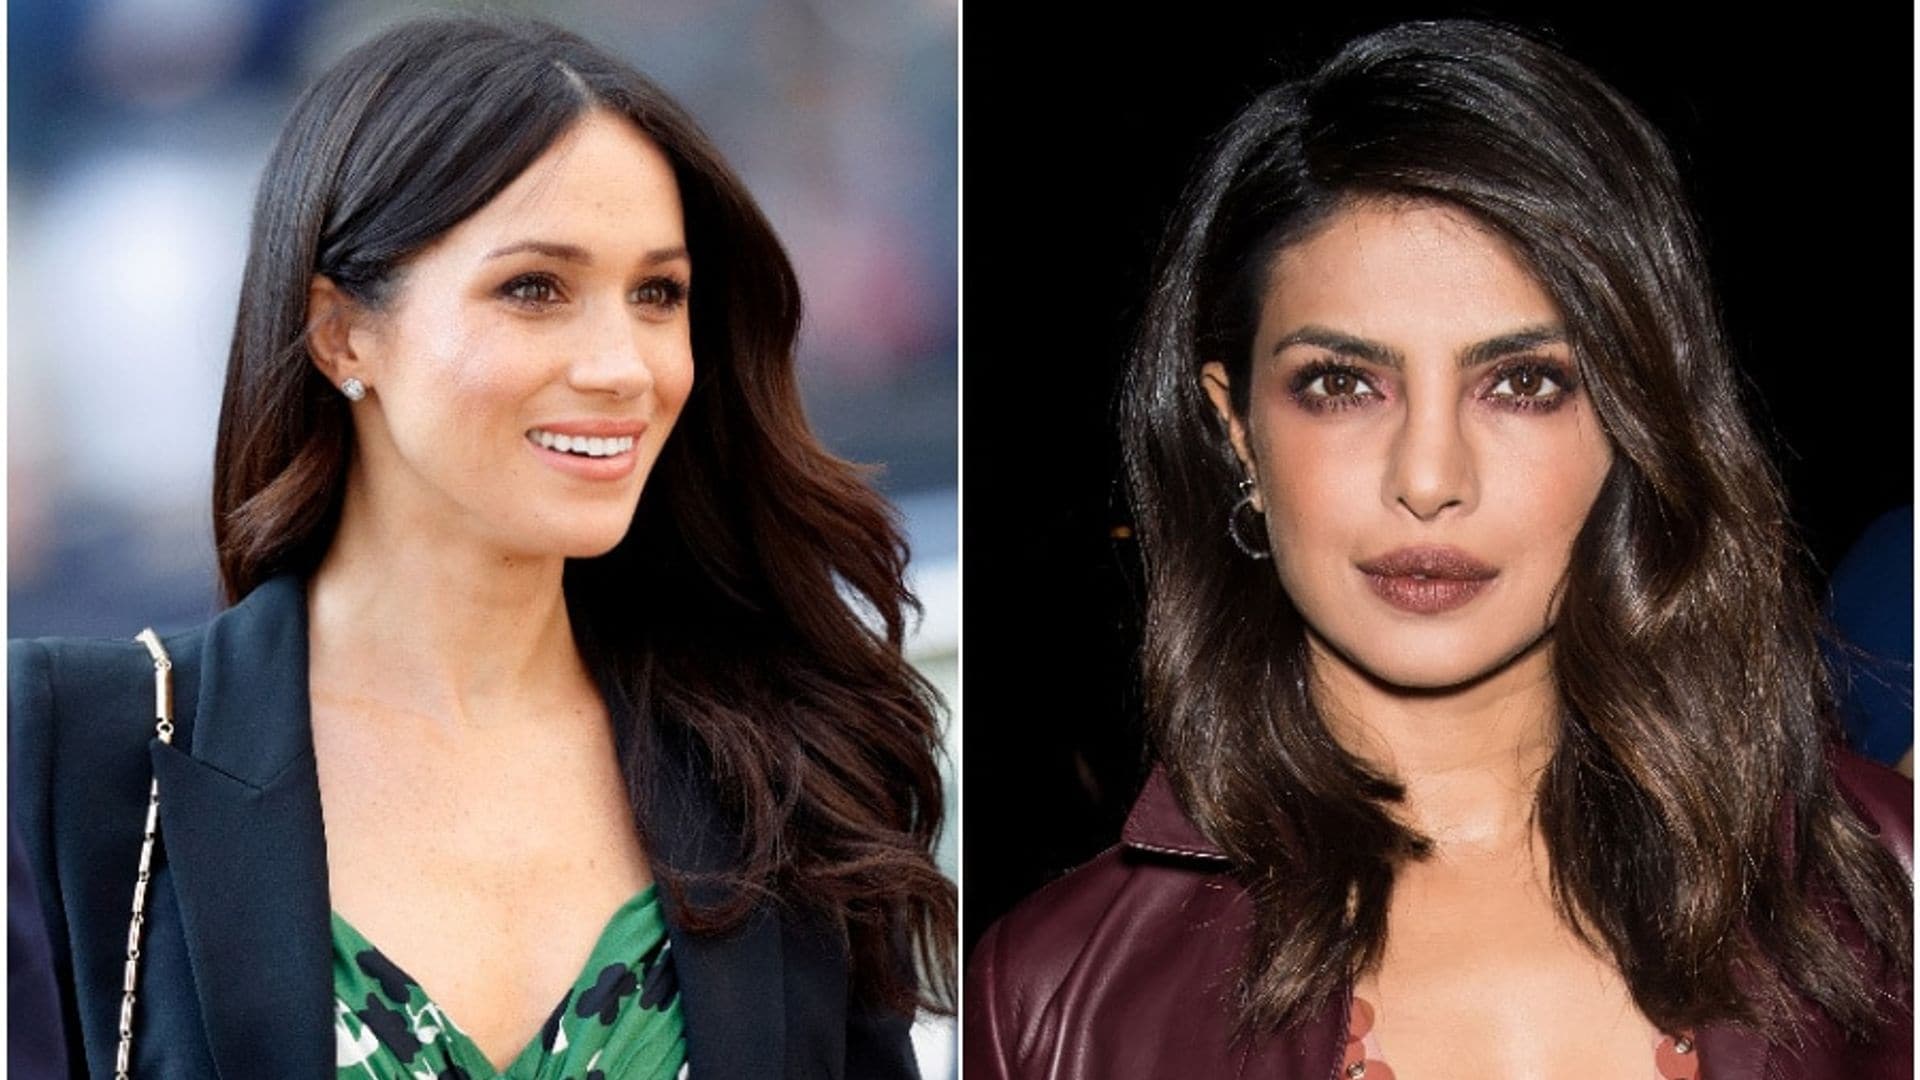 Priyanka Chopra reveals the one thing soon-to-be royal Meghan Markle still loves to do